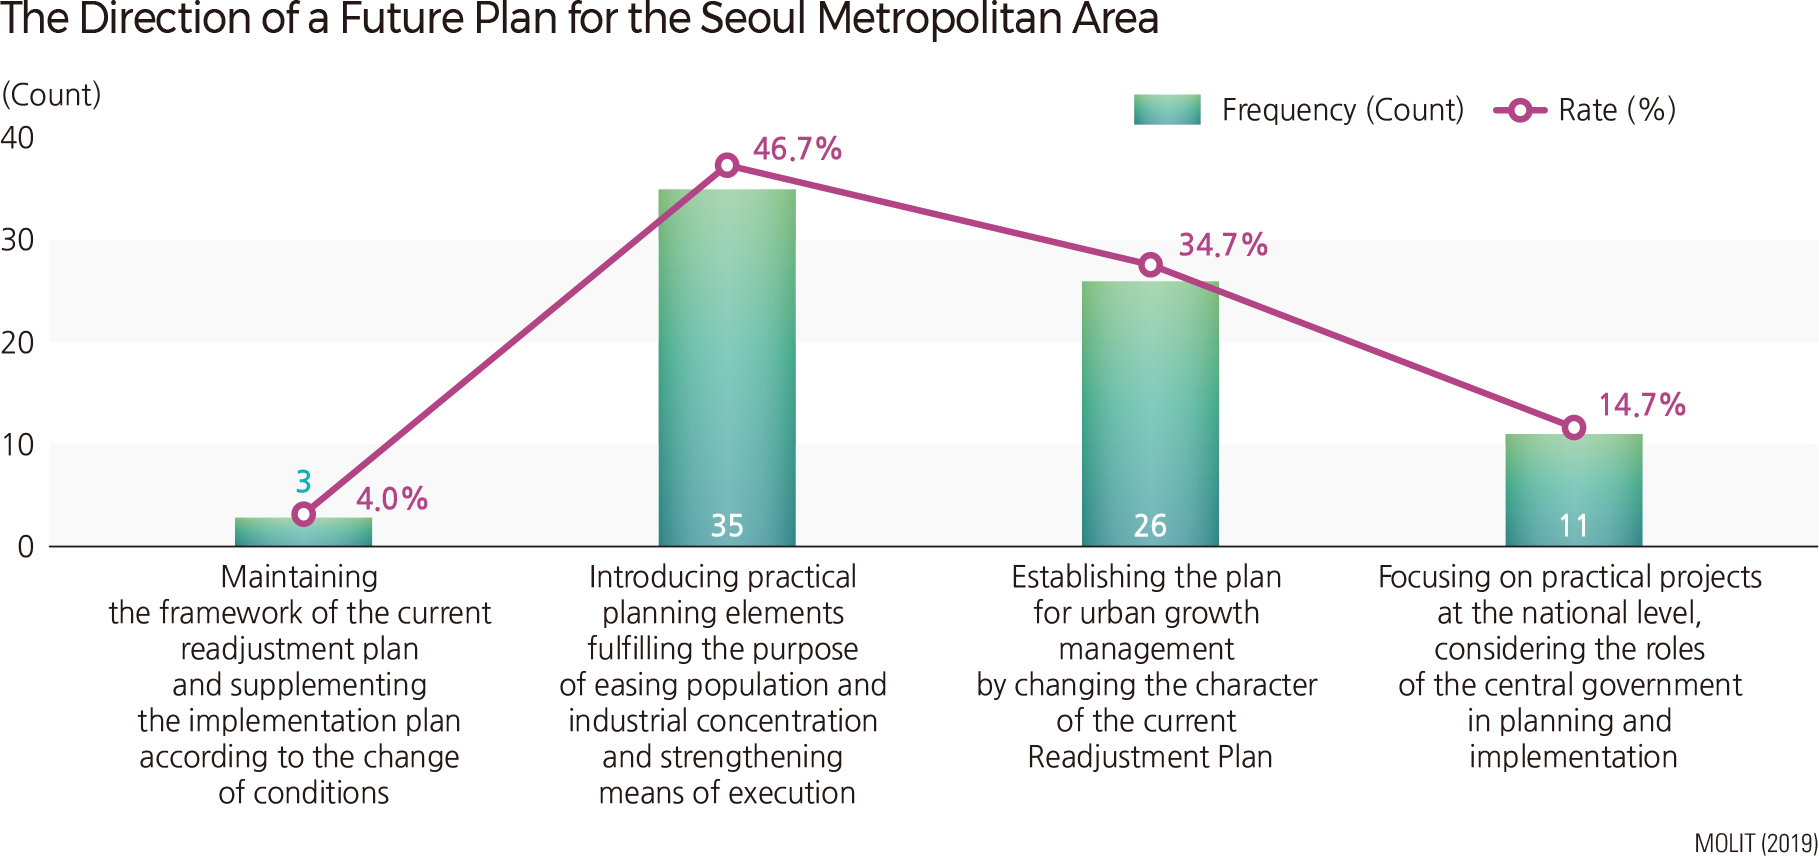 The Direction of a Future Plan for the Seoul Metropolitan Area